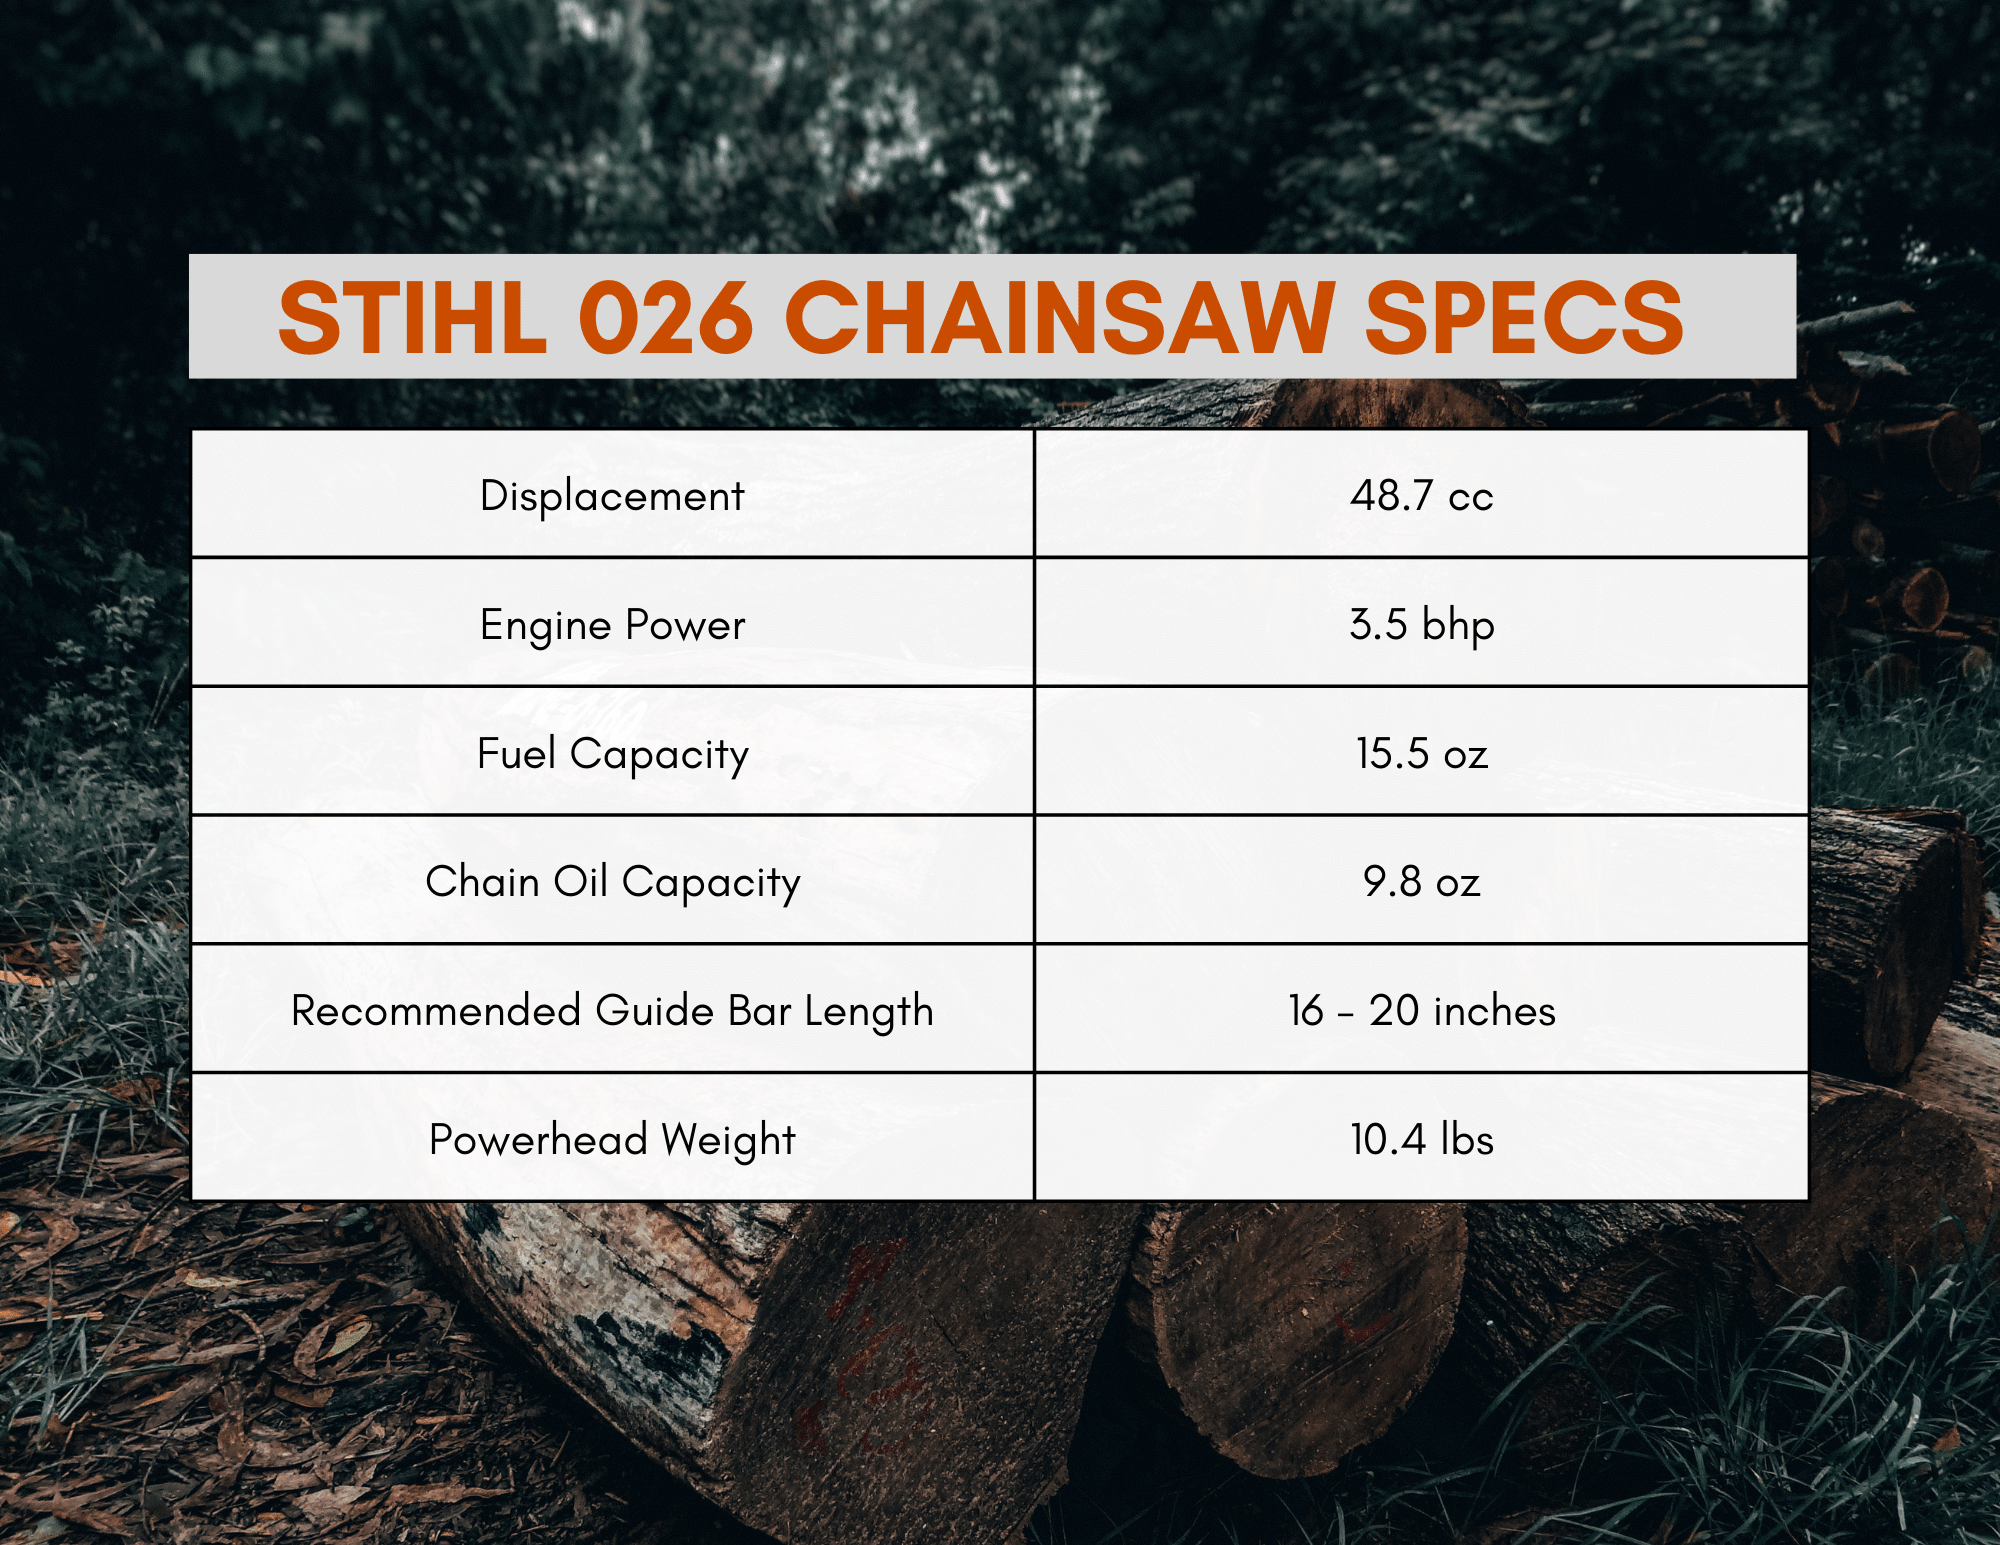 Stihl 026 Chainsaw Review - Price, Parts and Specs